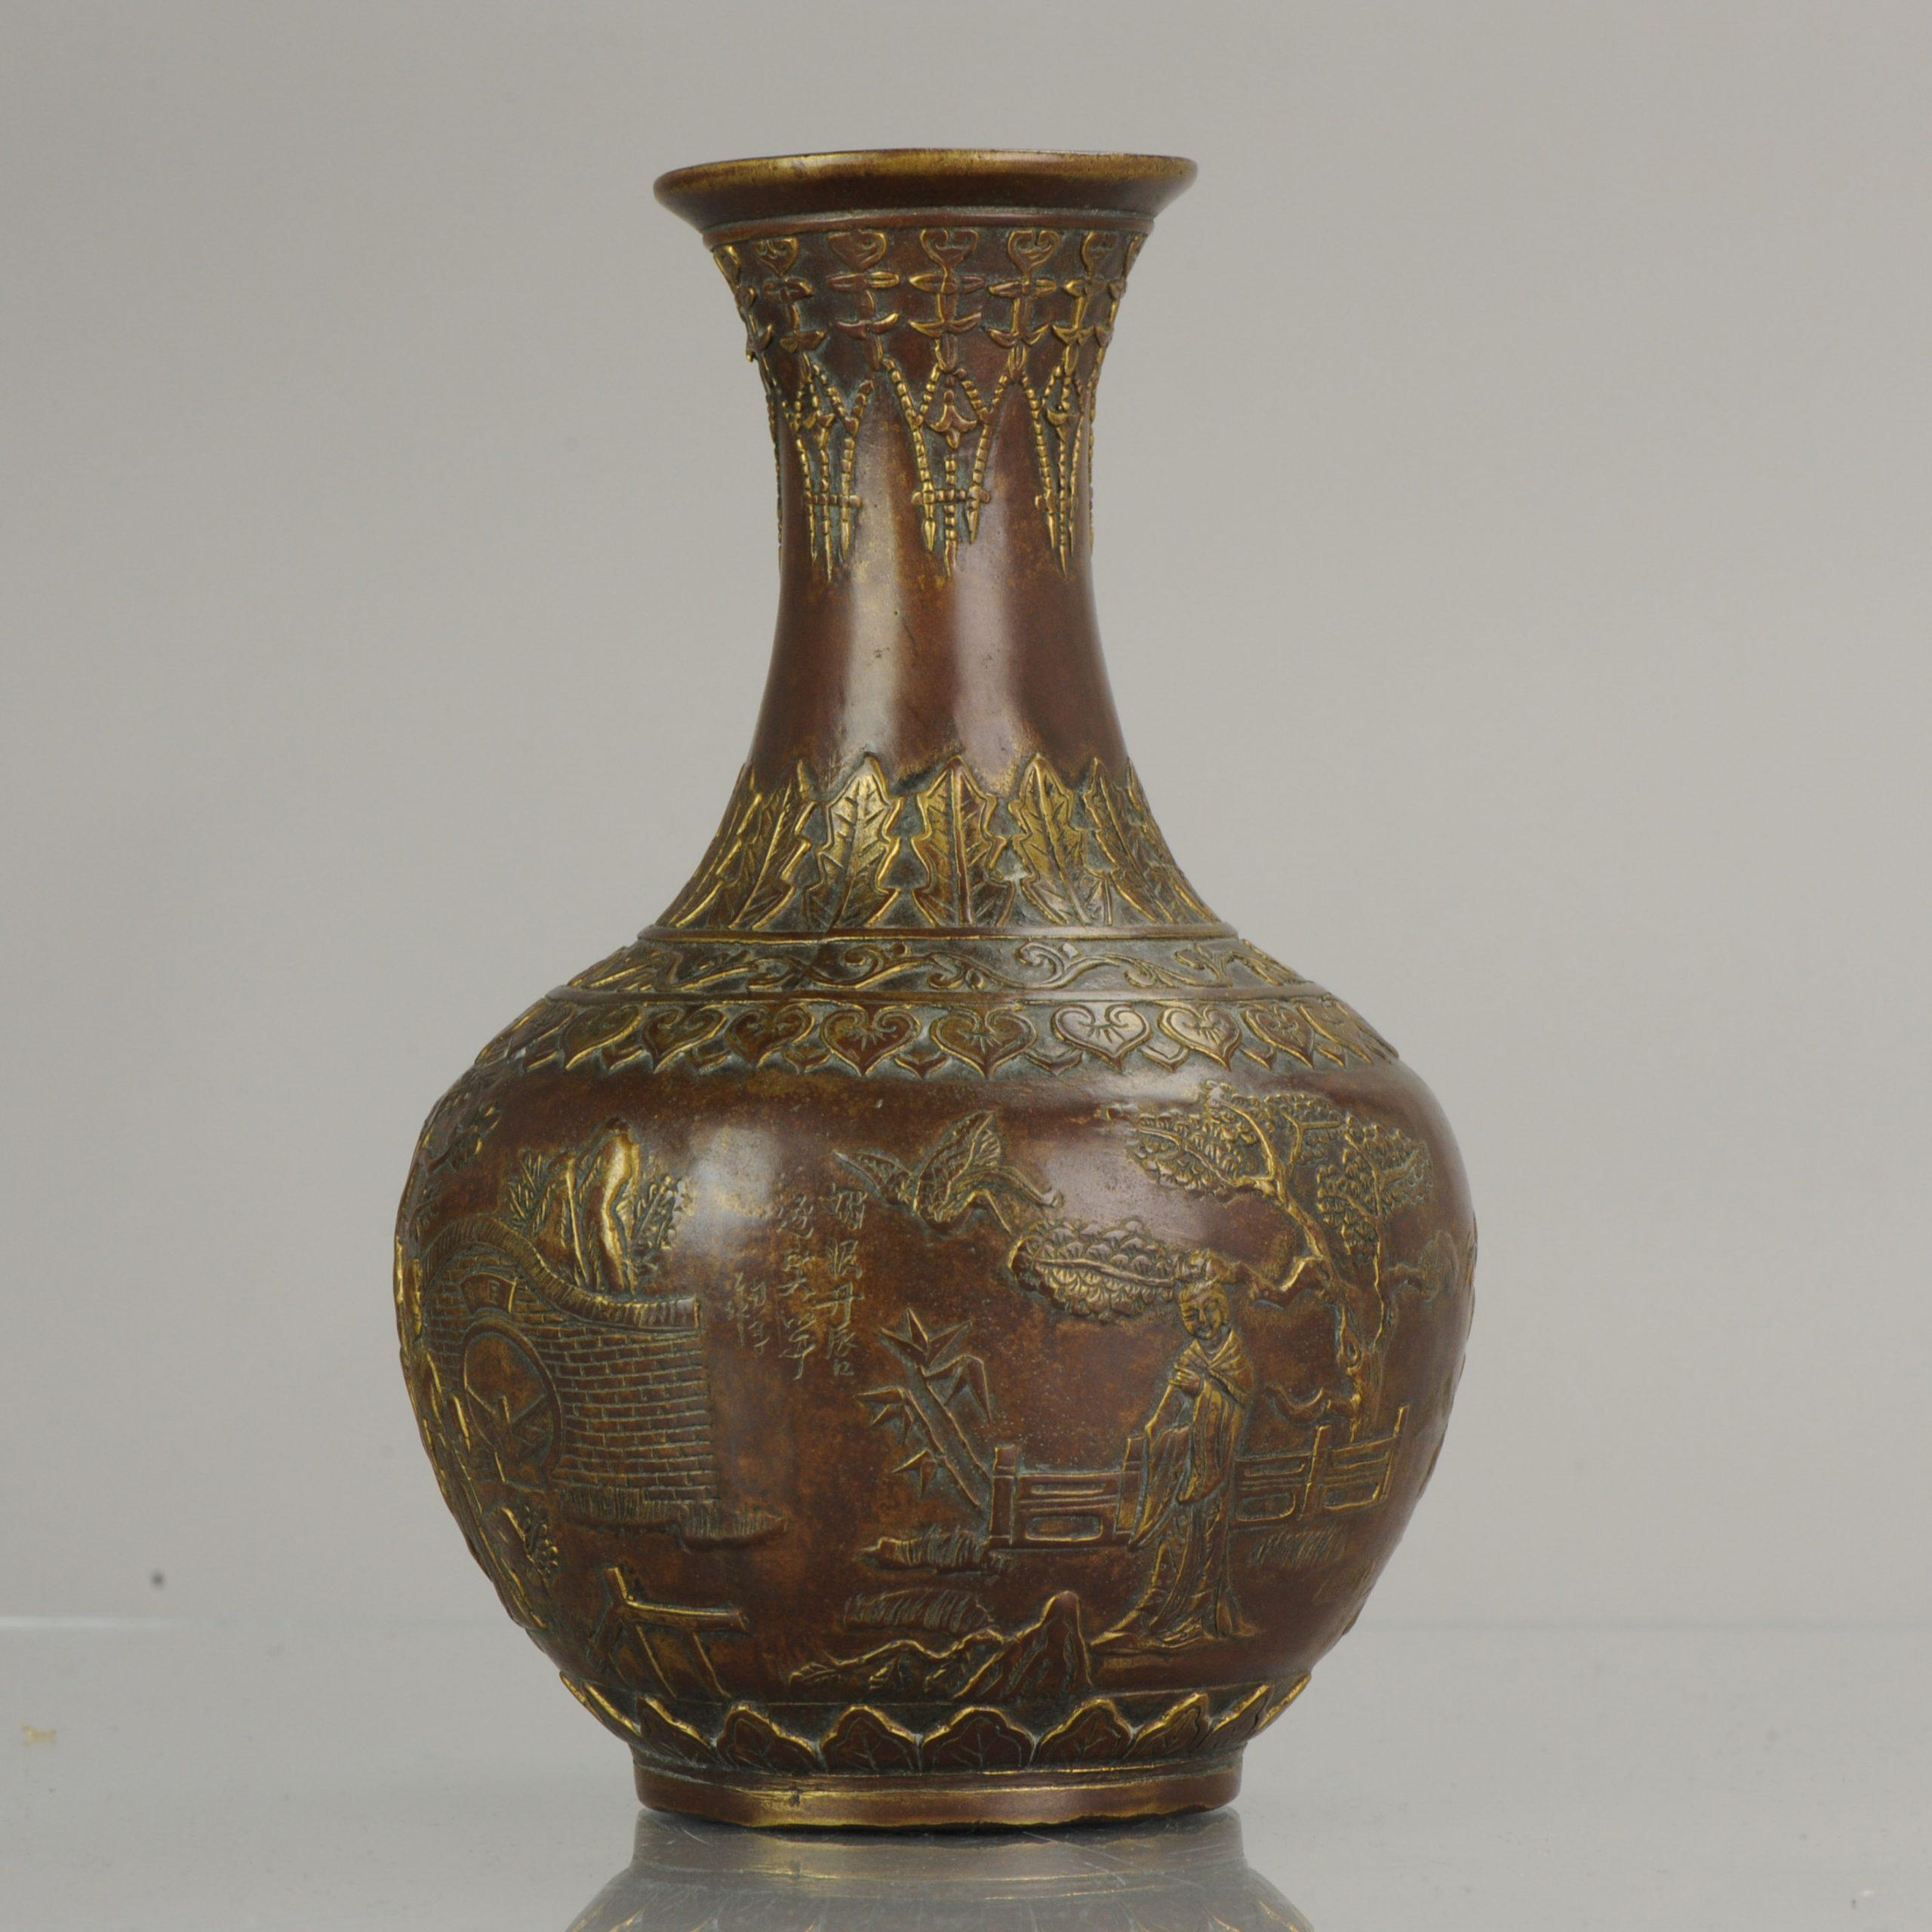 A bronze vase, decorated with ladies in a garden and poems. Dated 1937, but of a later date. End of the 20th century
Marked with seal mark. China.
Total weight approximate 1002 g.
 
Condition:
Overall condition very good condition, just some ware